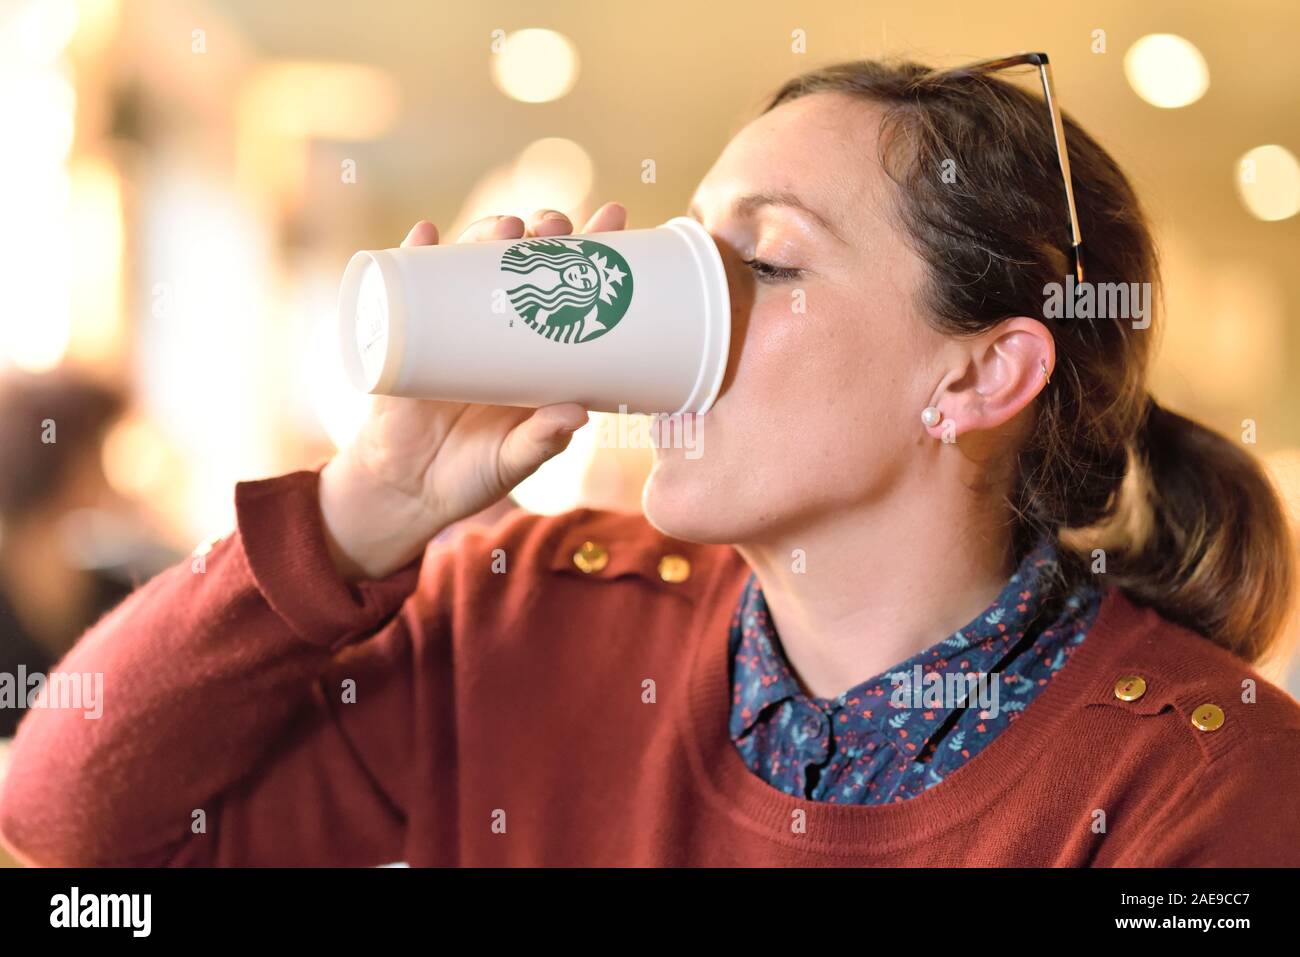 https://c8.alamy.com/comp/2AE9CC7/warsaw-apr-08-an-unidentified-man-holding-a-cup-of-beverage-from-starbucks-cafe-in-warsaw-on-april-08-2019-in-poland-2AE9CC7.jpg